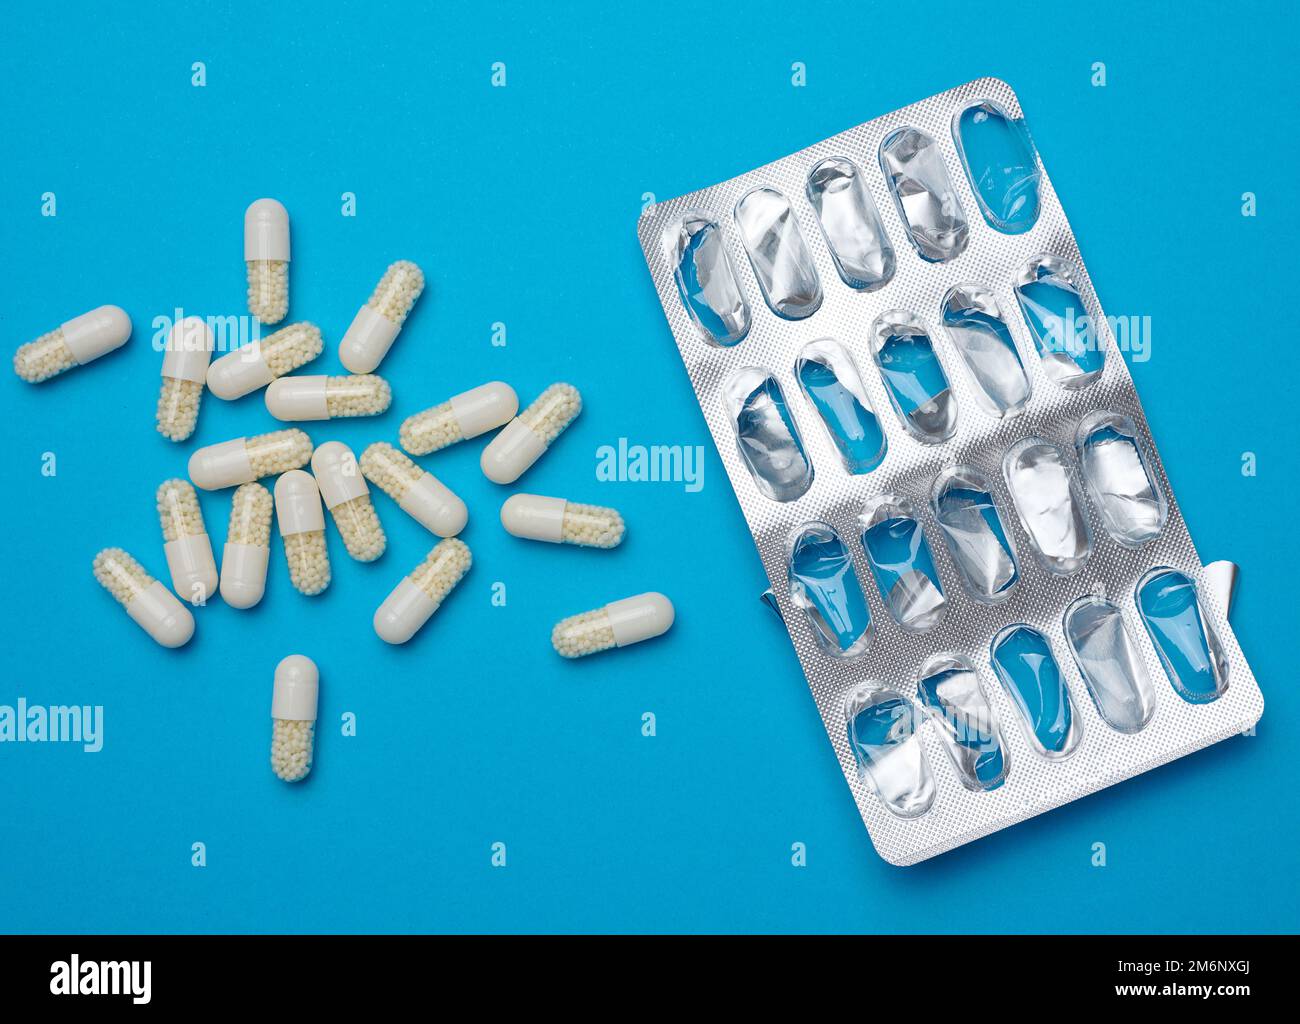 White oval pills and blank blister pack on blue background Stock Photo